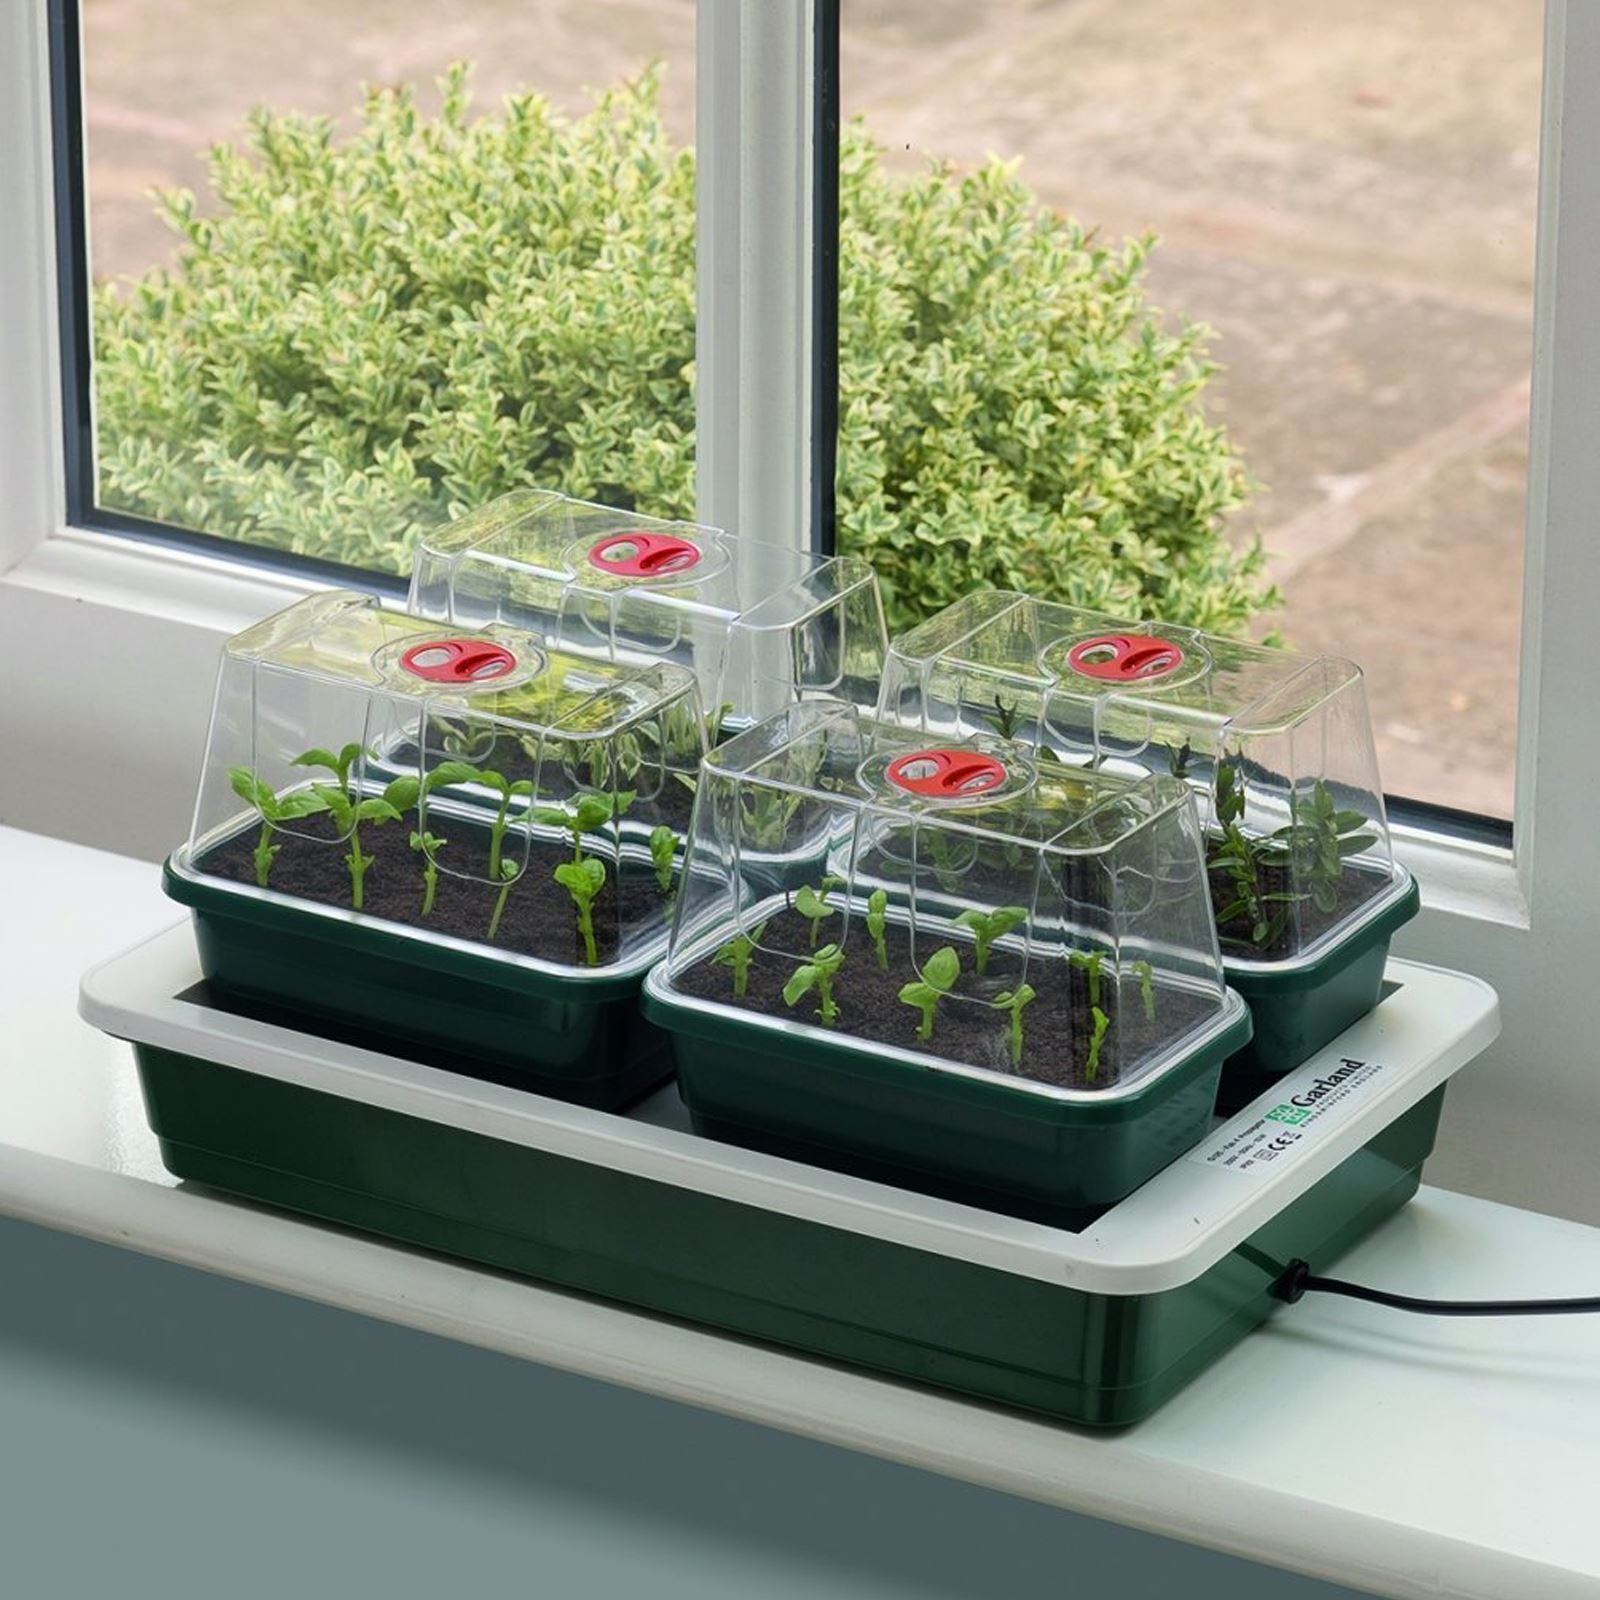 Garland G125 Fab 4 Heated Electric Propagator Plant Seed with 4 Vented Trays